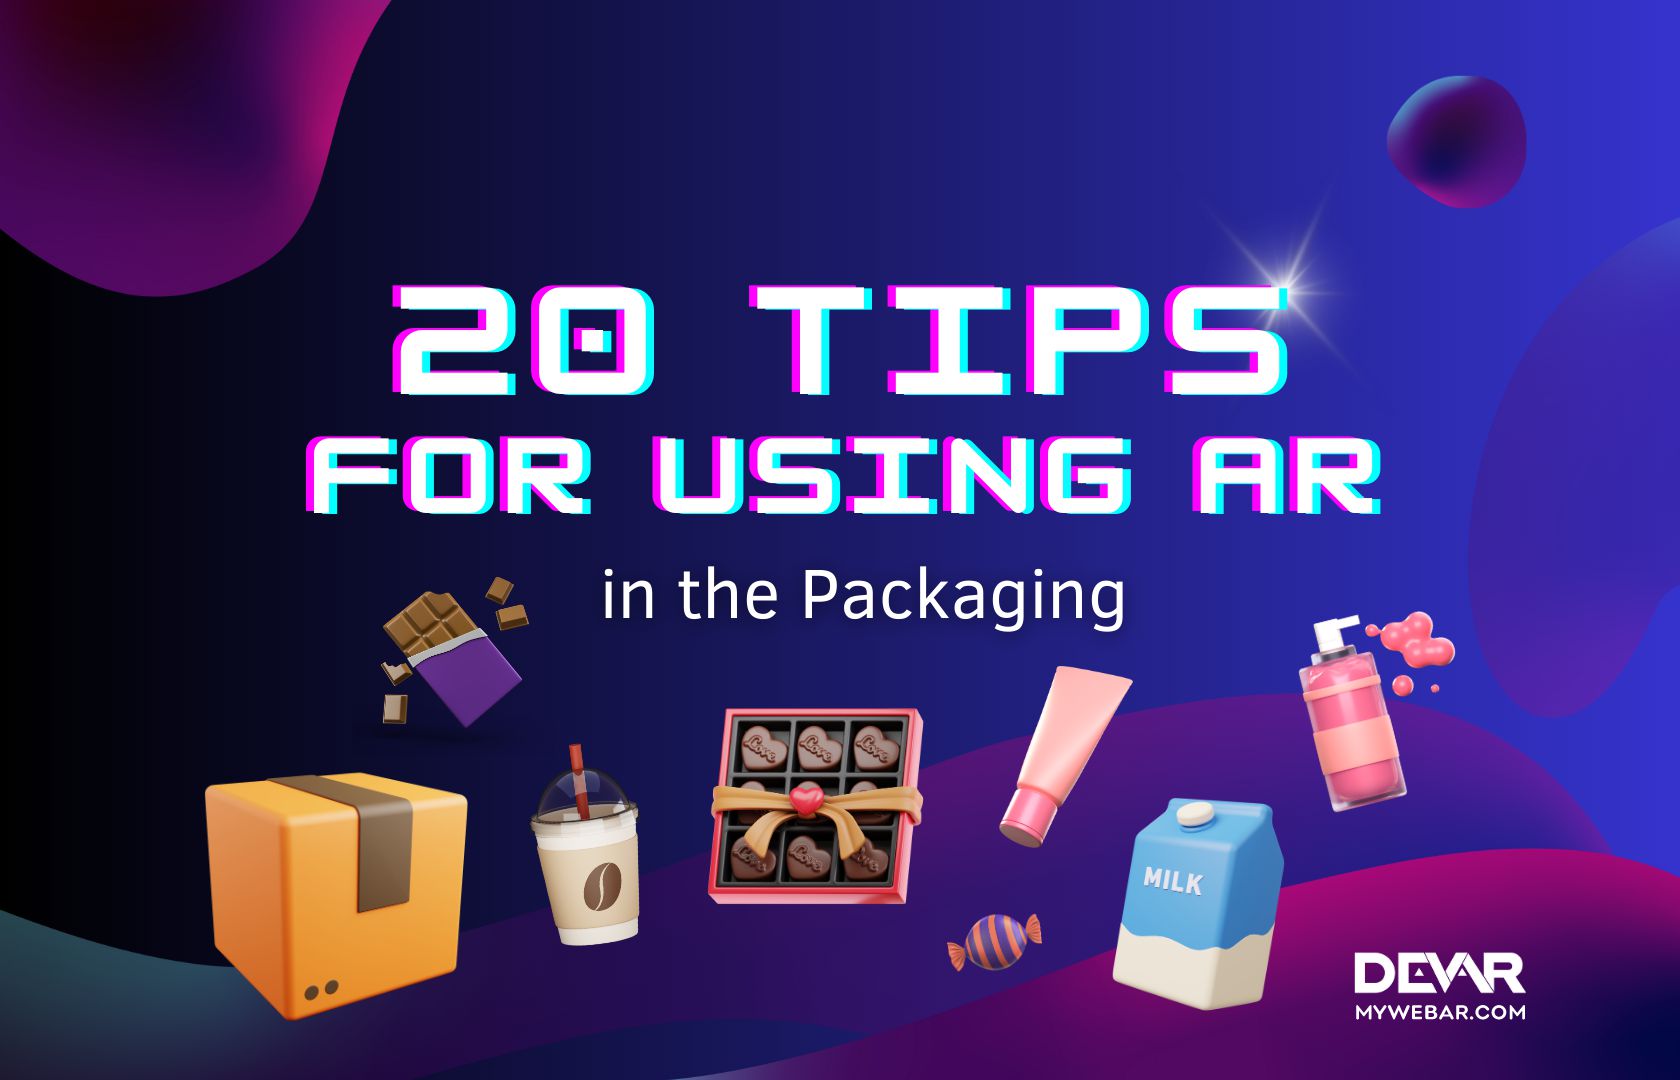 20 Tips for Using AR in the Packaging